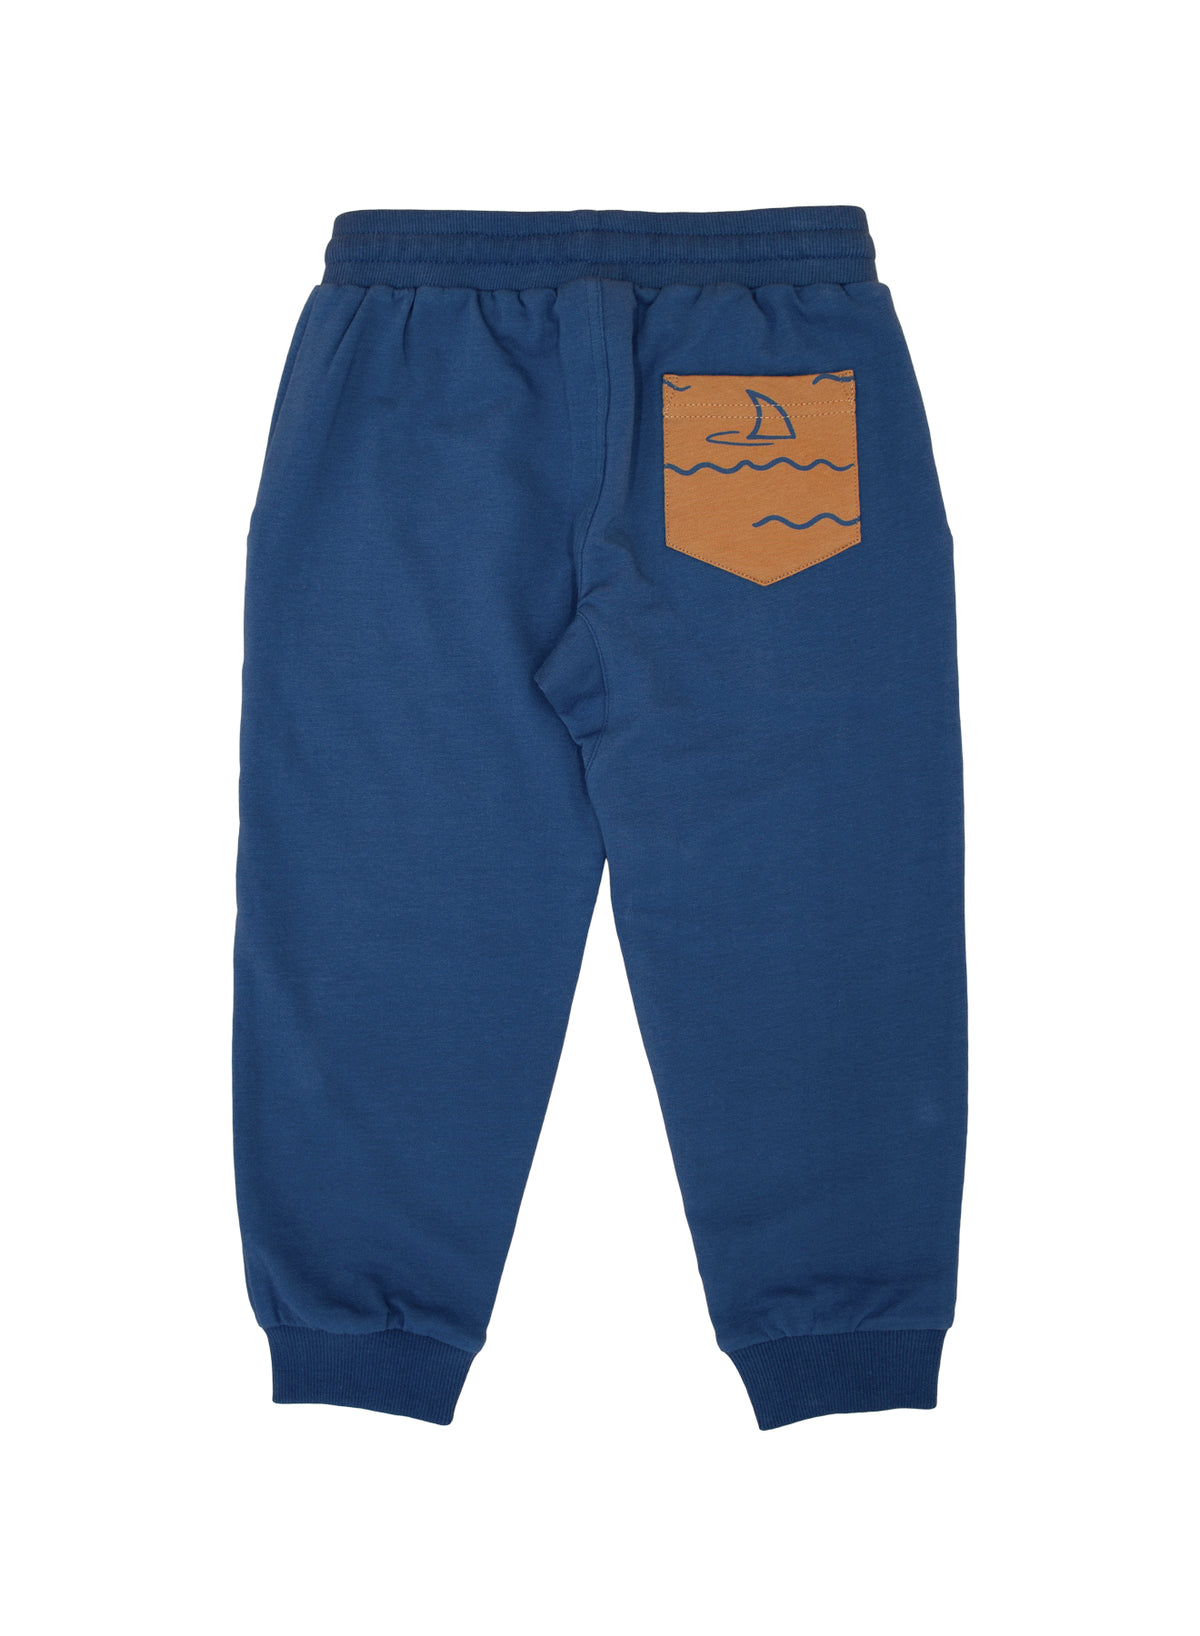 Feather 4 Arrow Protect Sharks Jogger in Navy | Sweet Threads